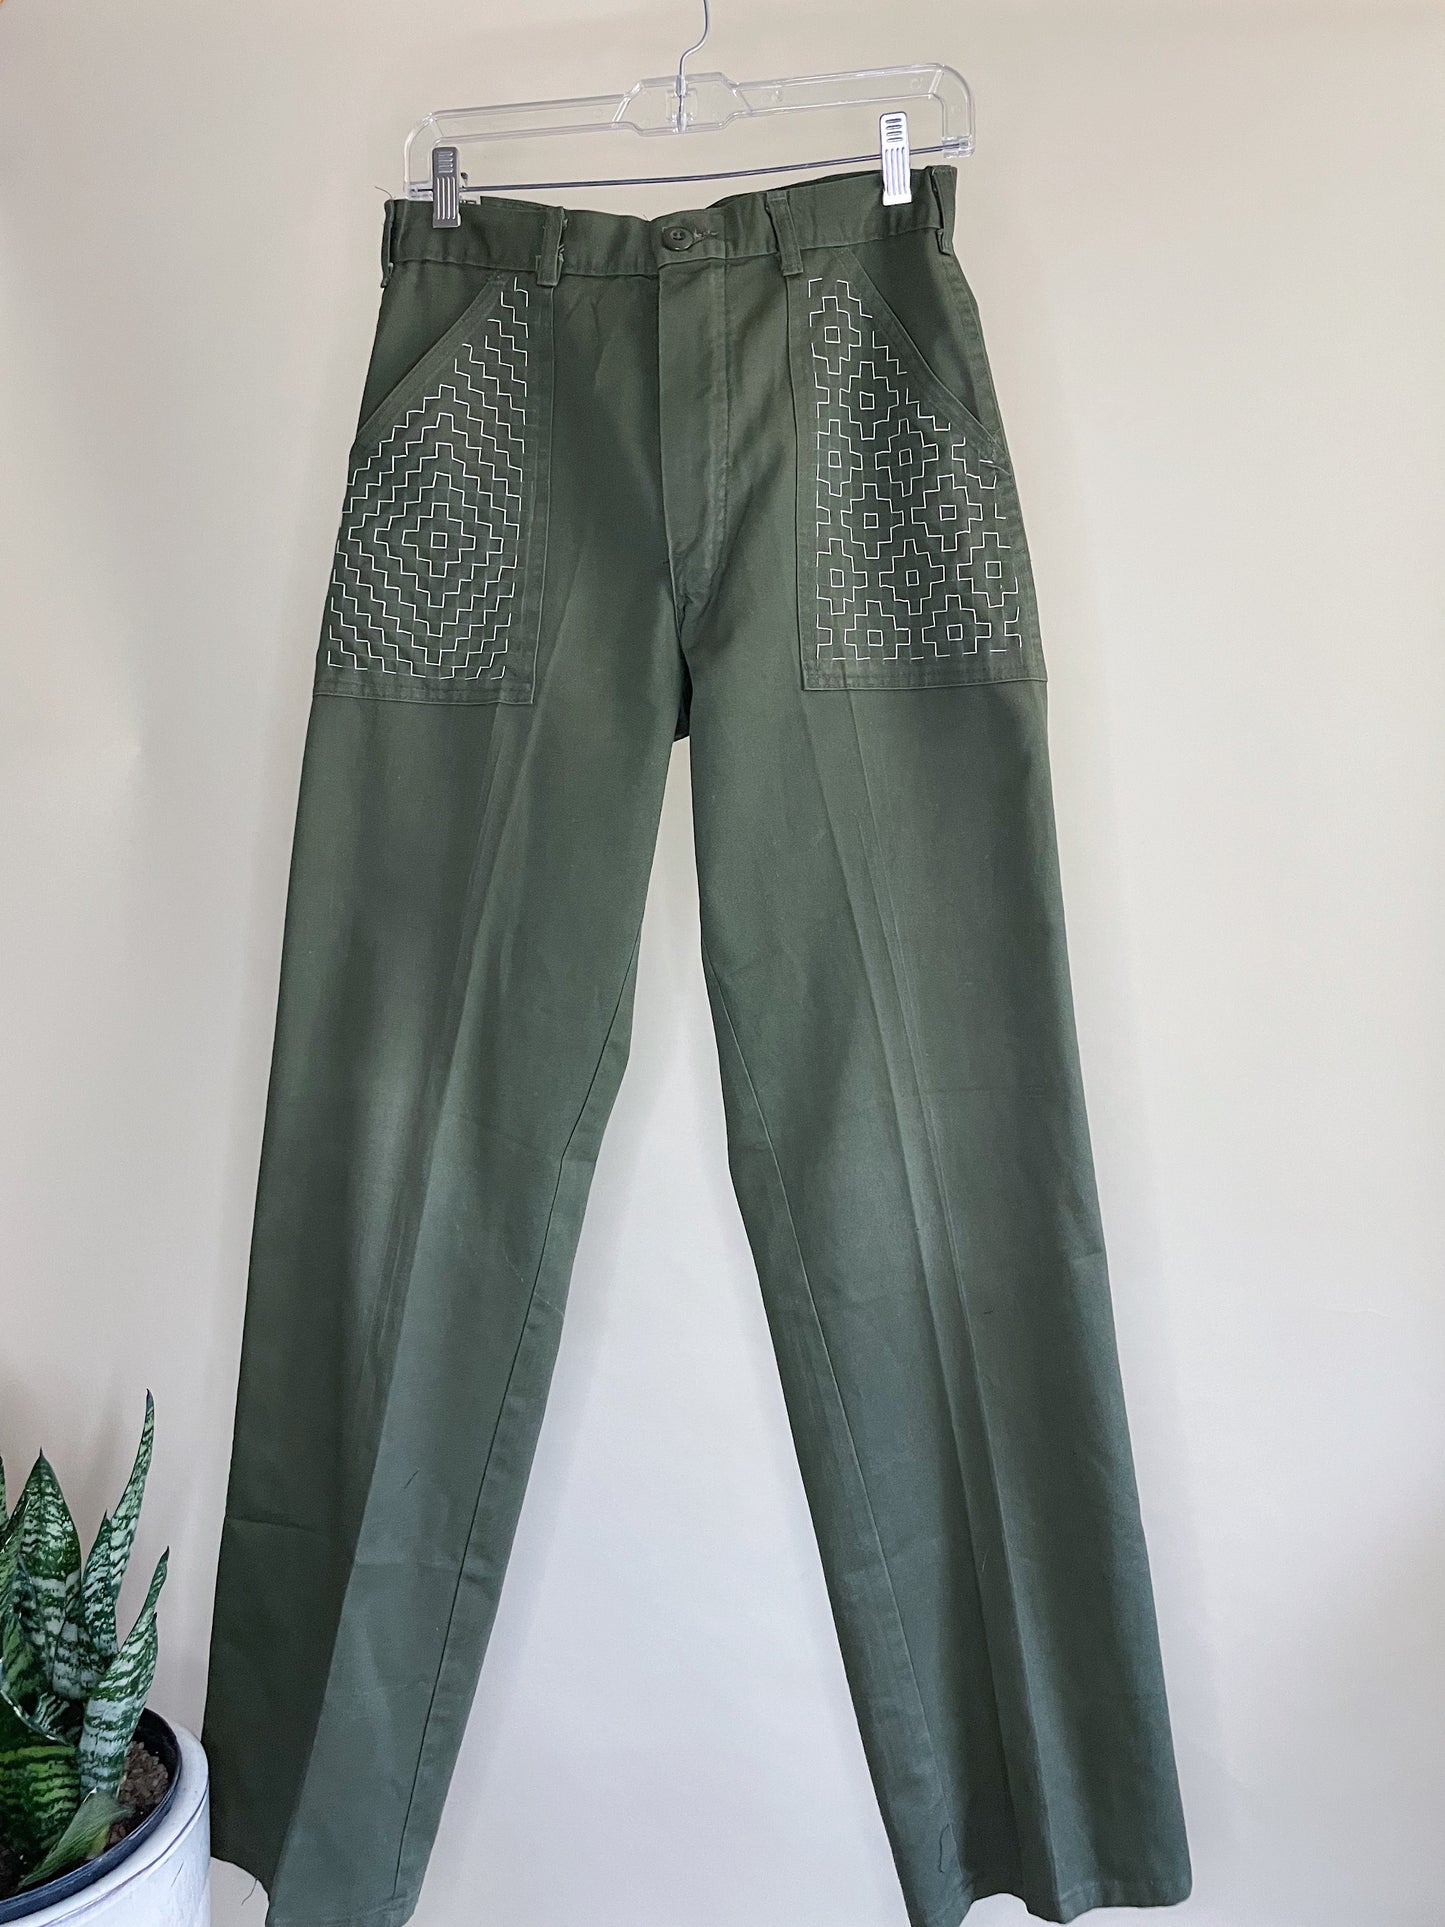 28" Waist 1960's Military Issued Olive Pants with Sashiko Embroidery - S/M